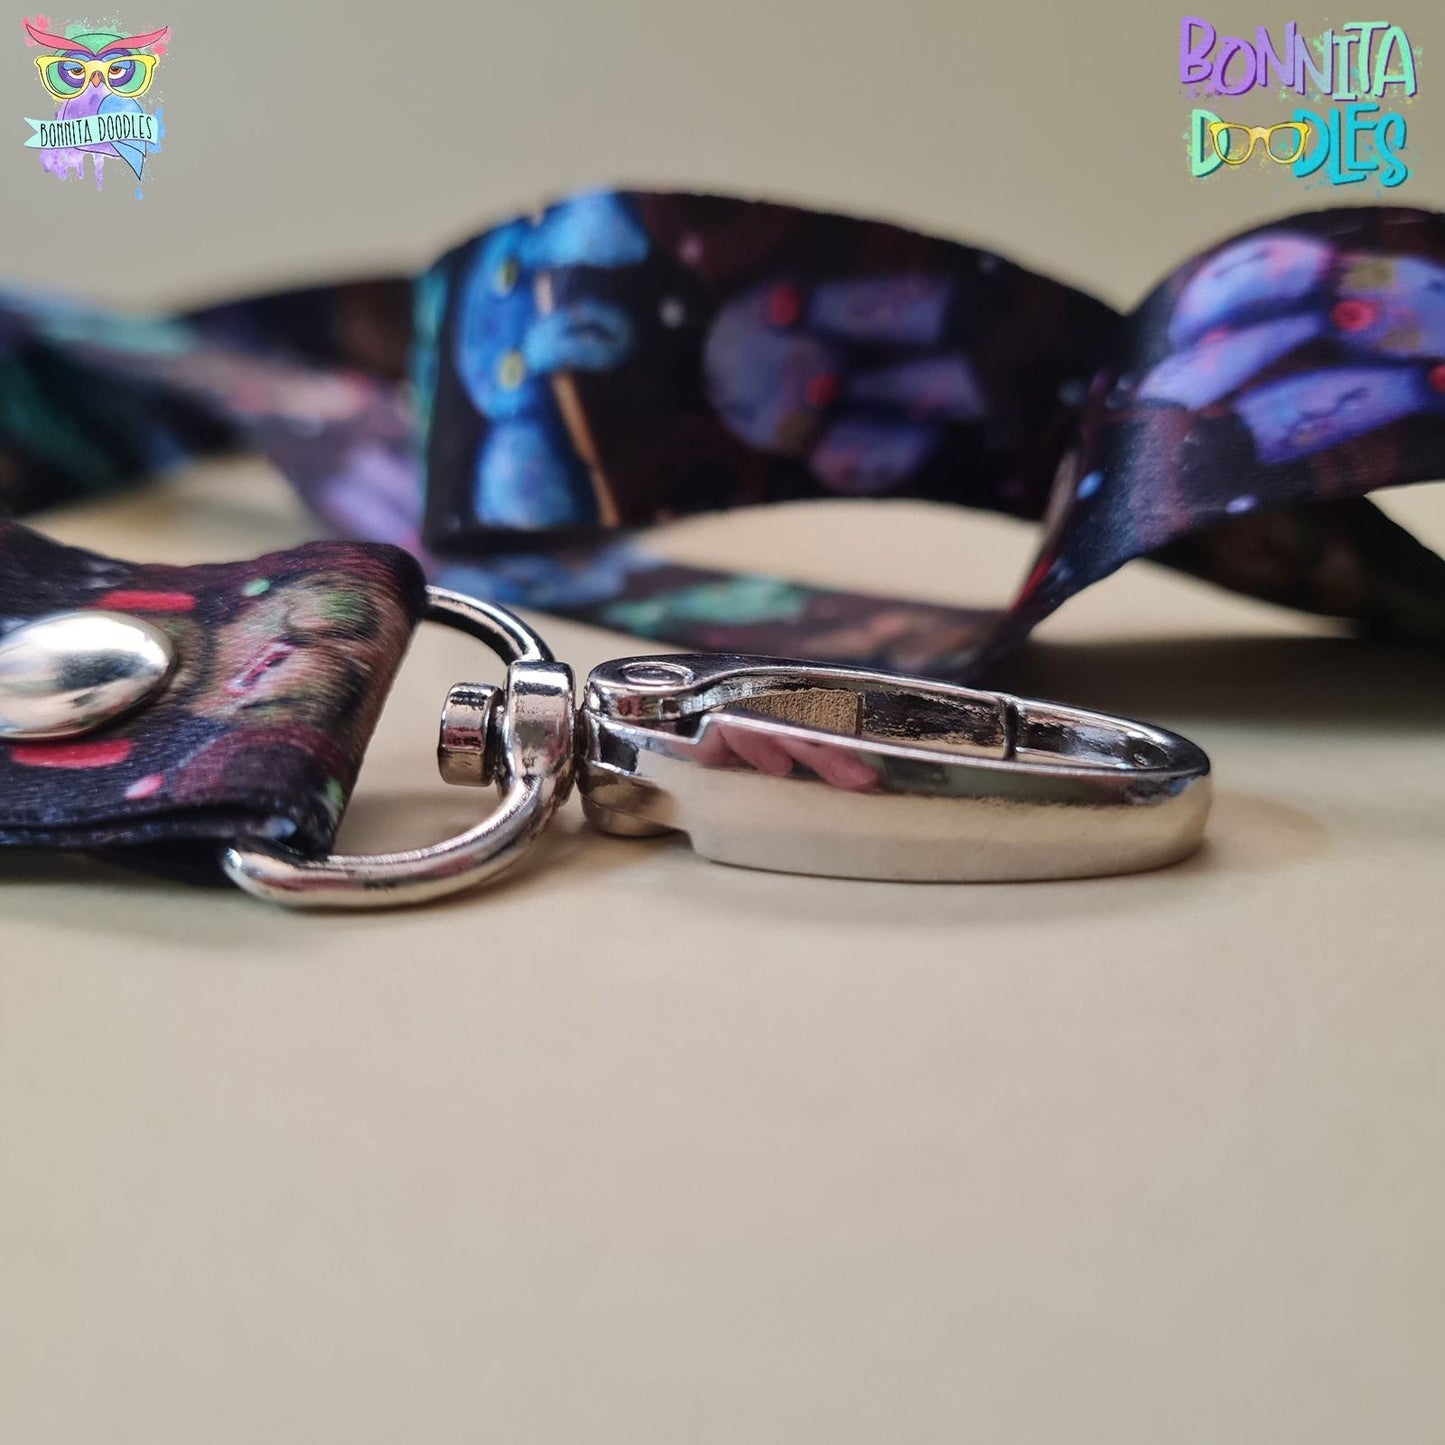 Voodoo dolls - Lanyard - soft and perfect for sensory accommodation.